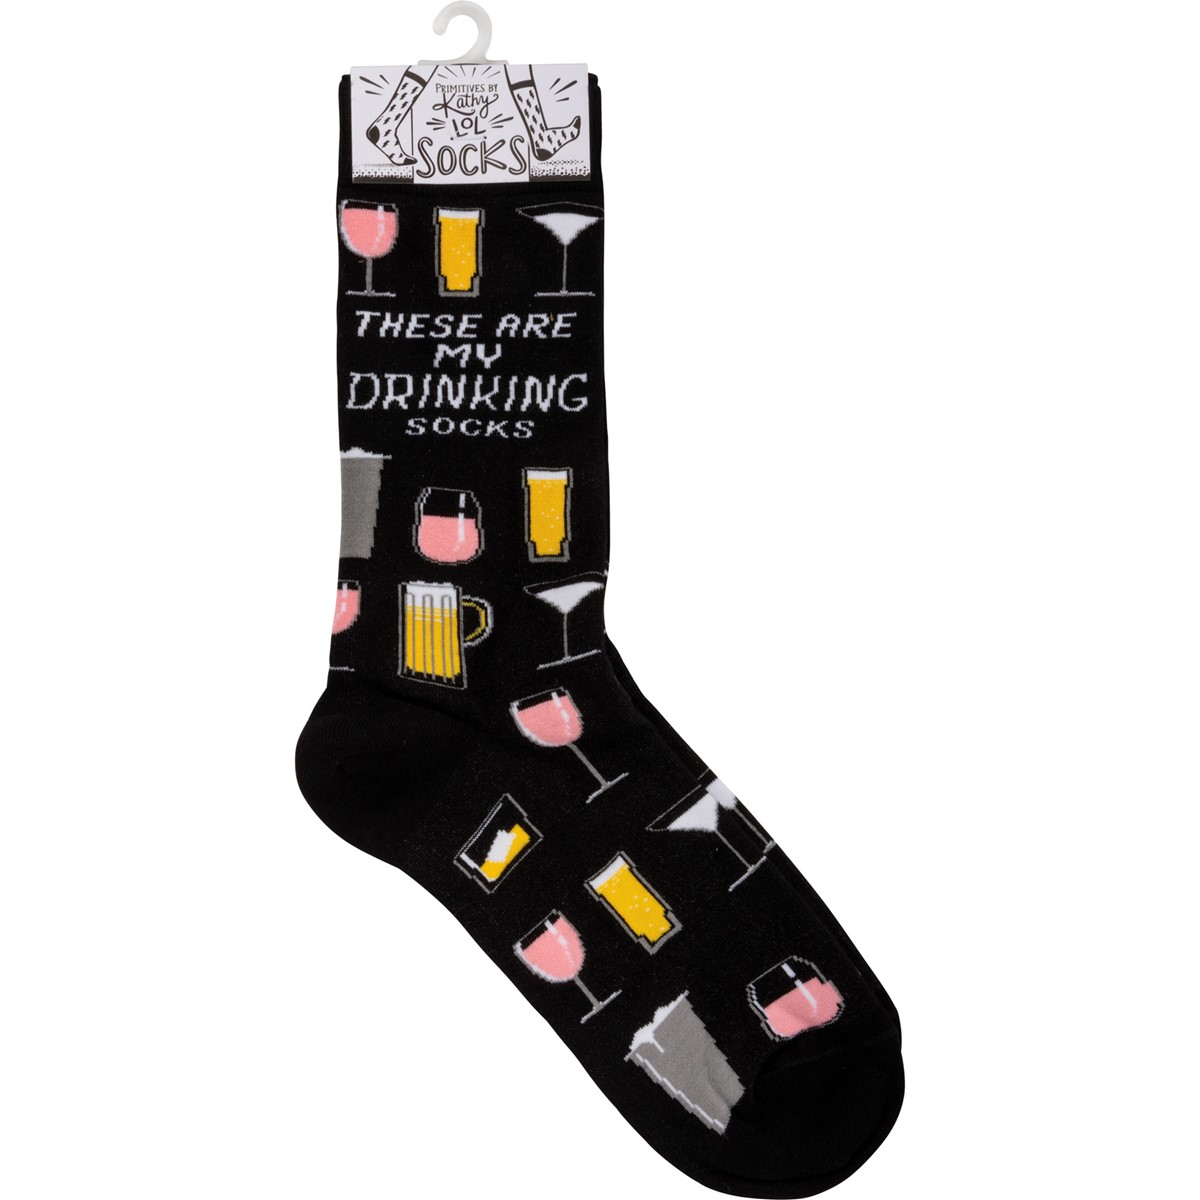 Socks - These Are My Drinking Socks - One Size Fits Most - Cotton, Nylon, Spandex